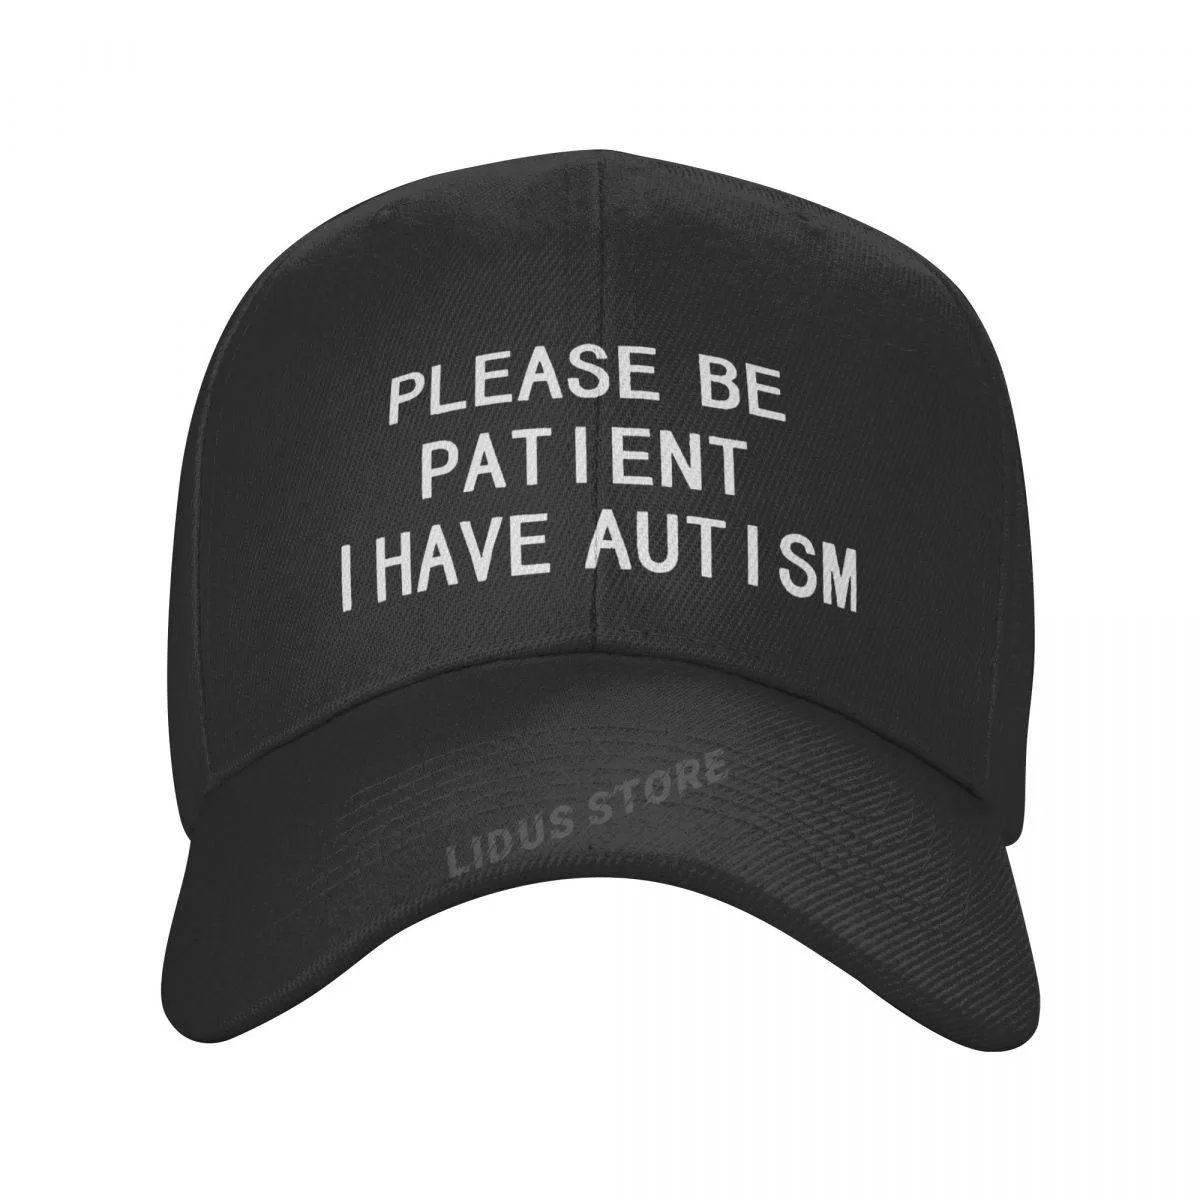 Please be Patient i have Autism кепка. Please be Patient i have Autism Мем. Papers please be Patient i have Autism meme. Купить плиз